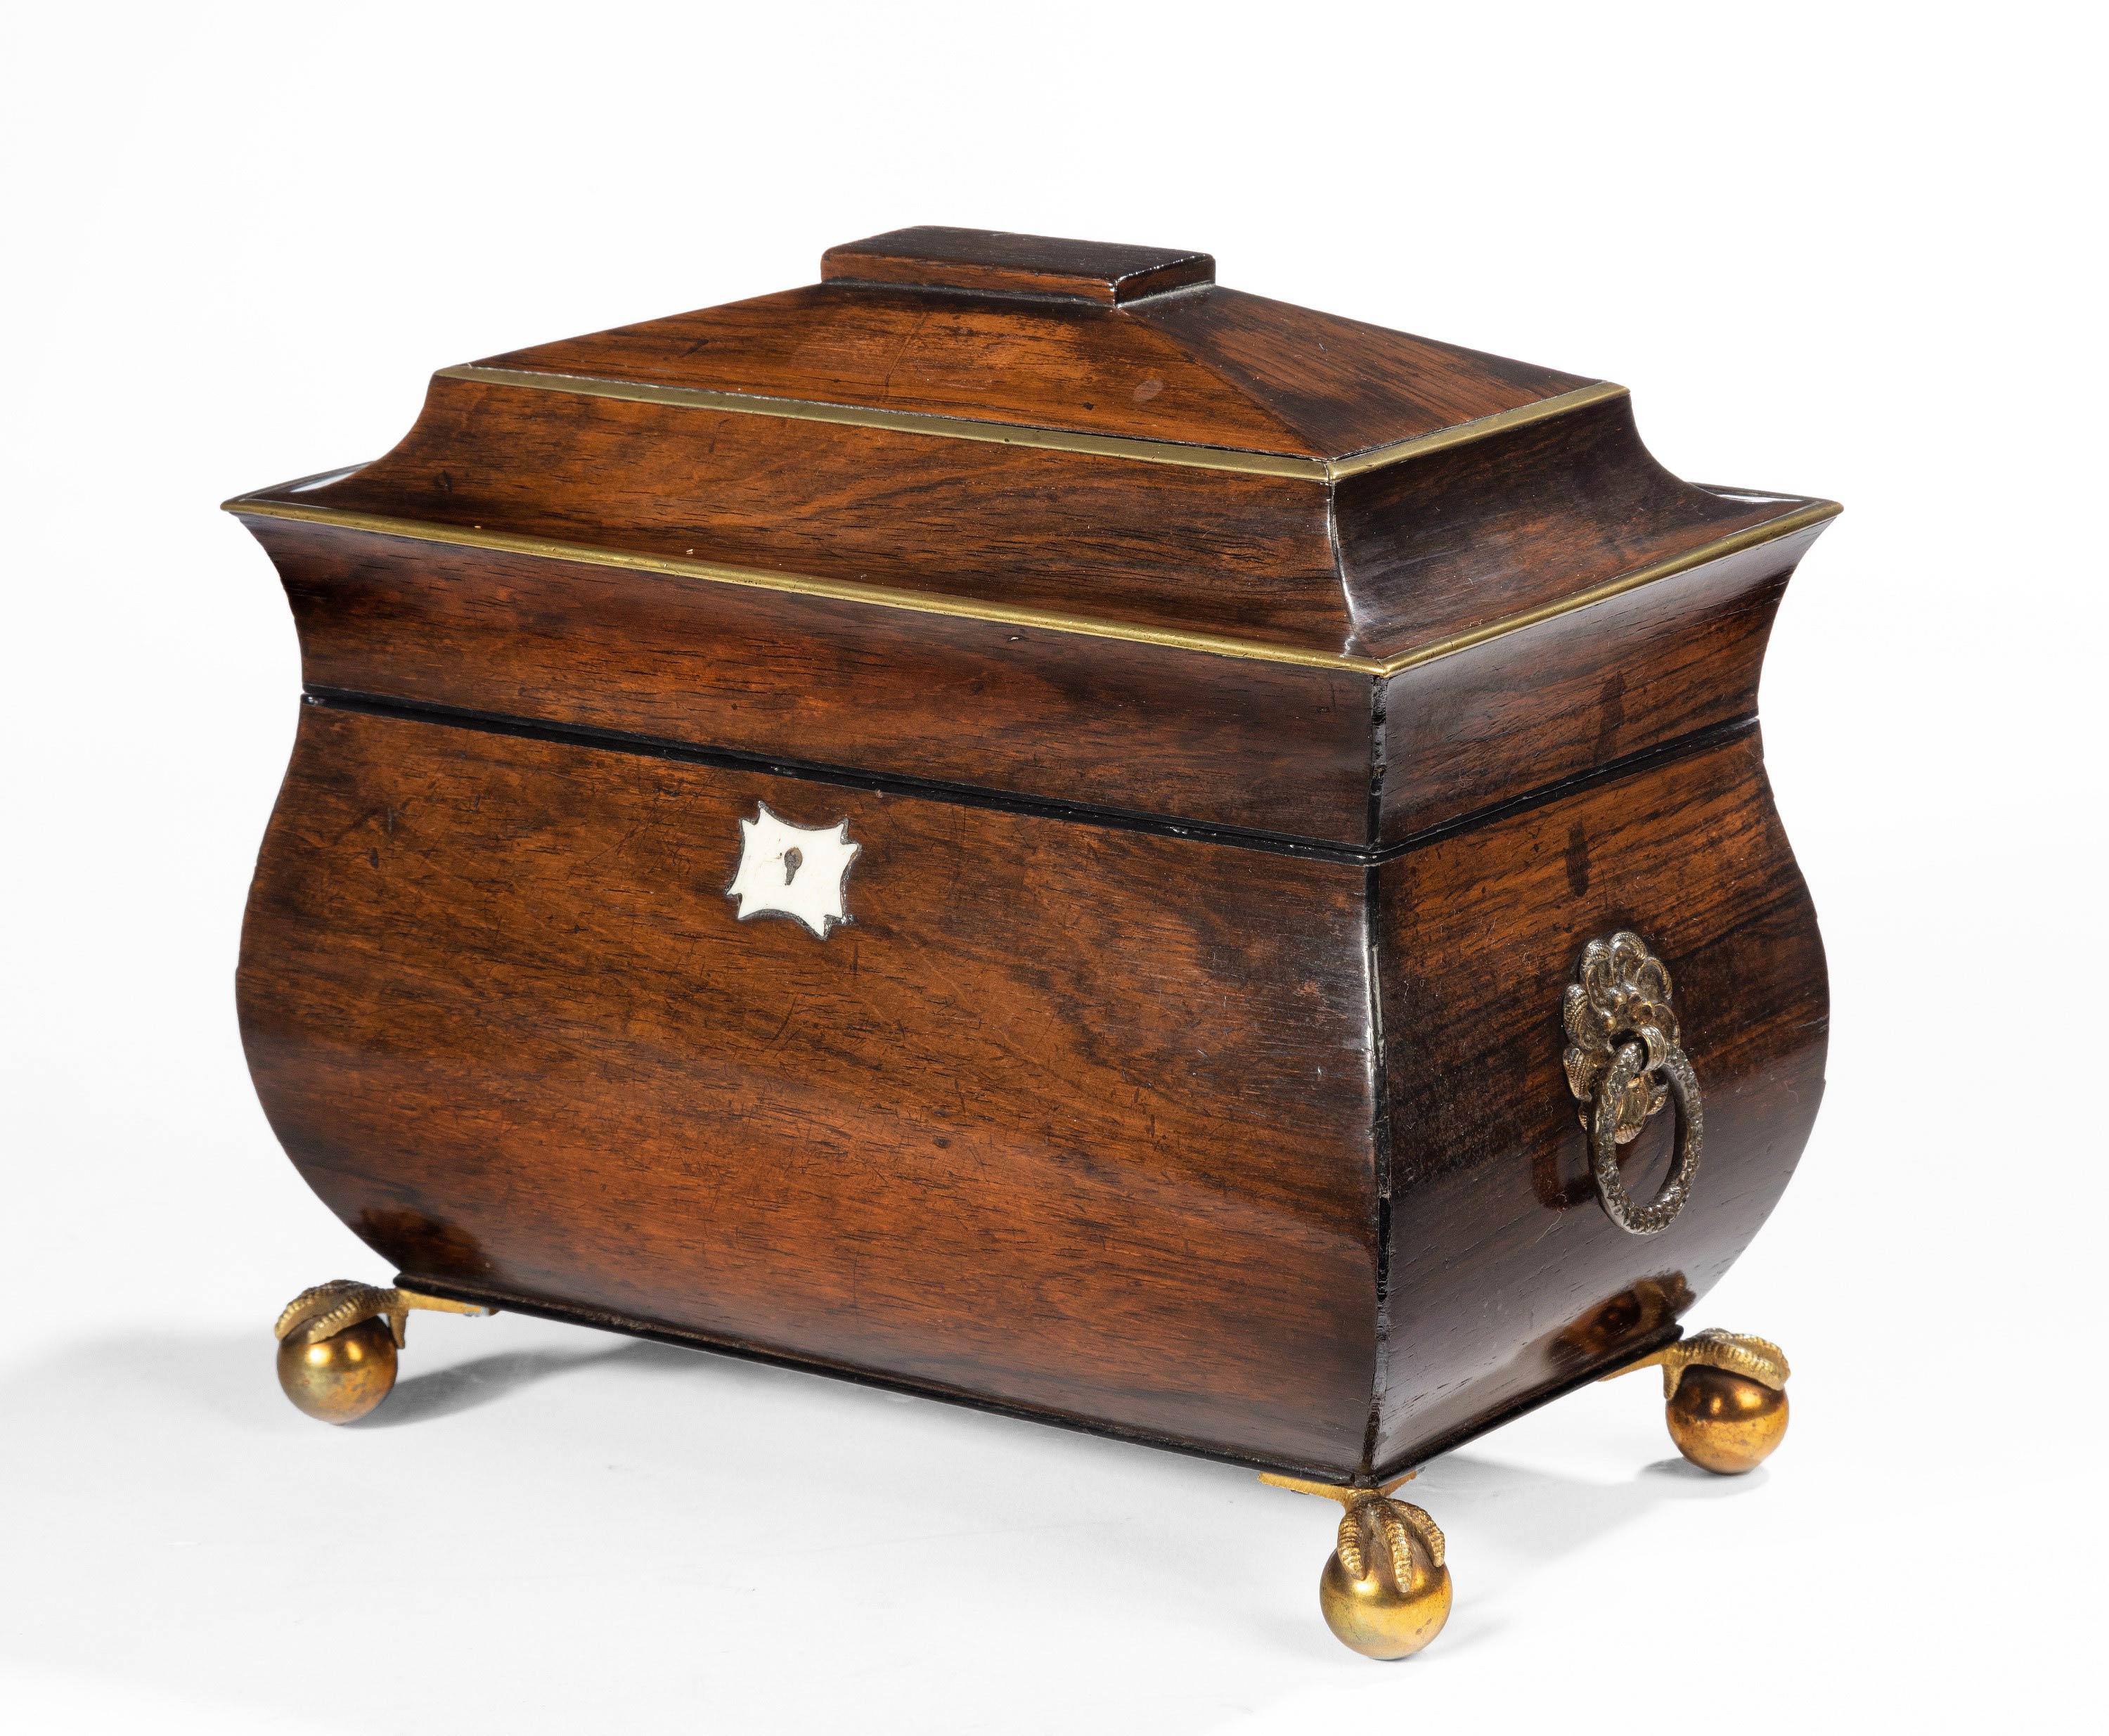 George III Period Mahogany Bombay Caddy In Good Condition In Peterborough, Northamptonshire